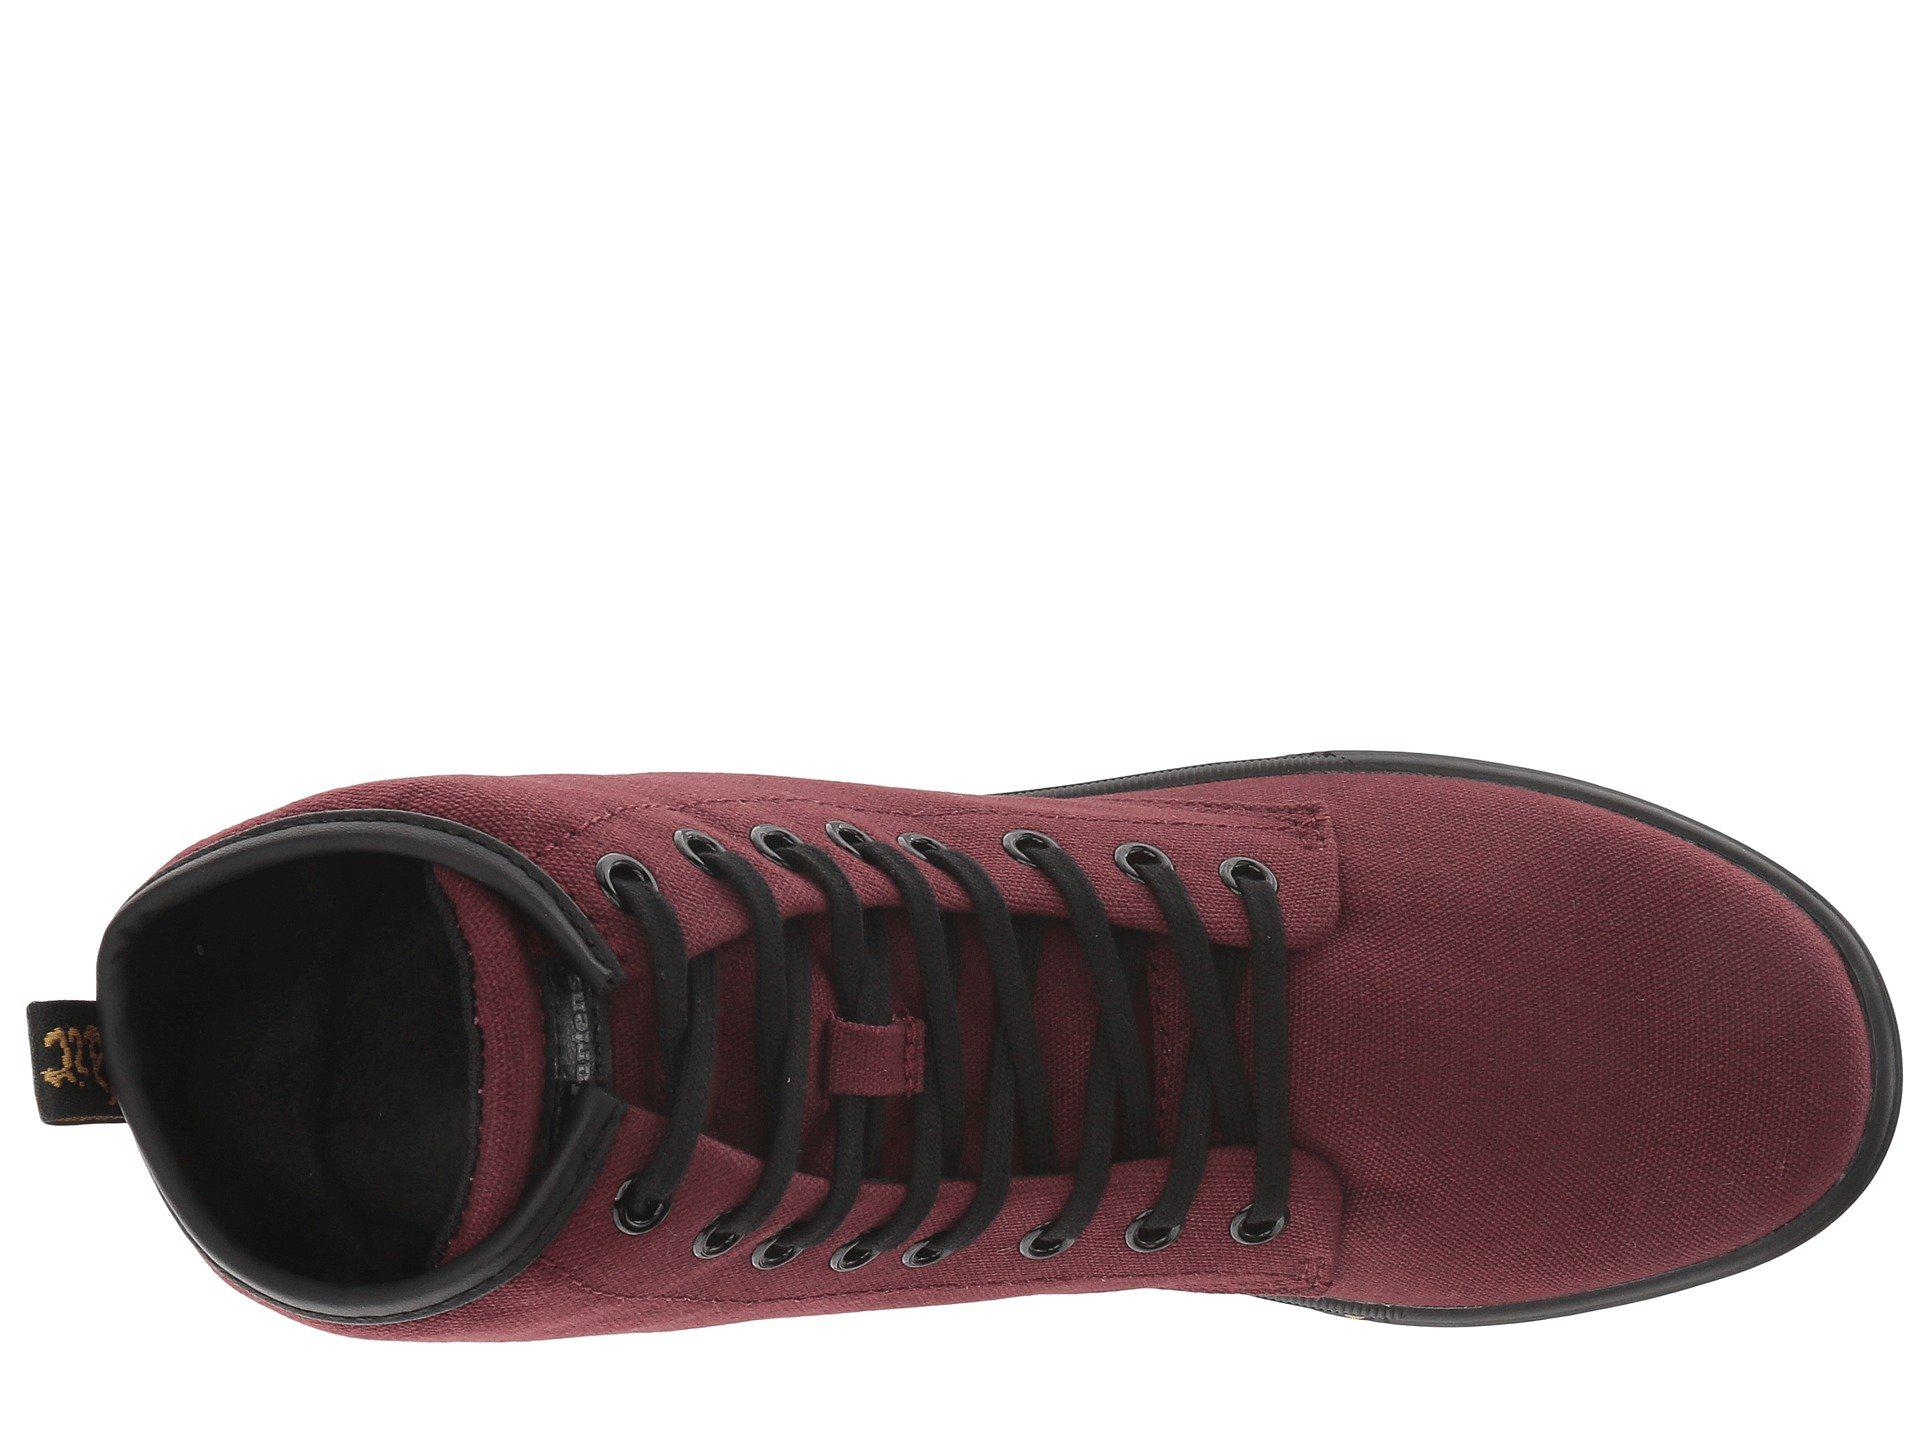 Dr. Martens Synthetic Sheridan Octavo (old Oxblood Canvas) Boots - Lyst